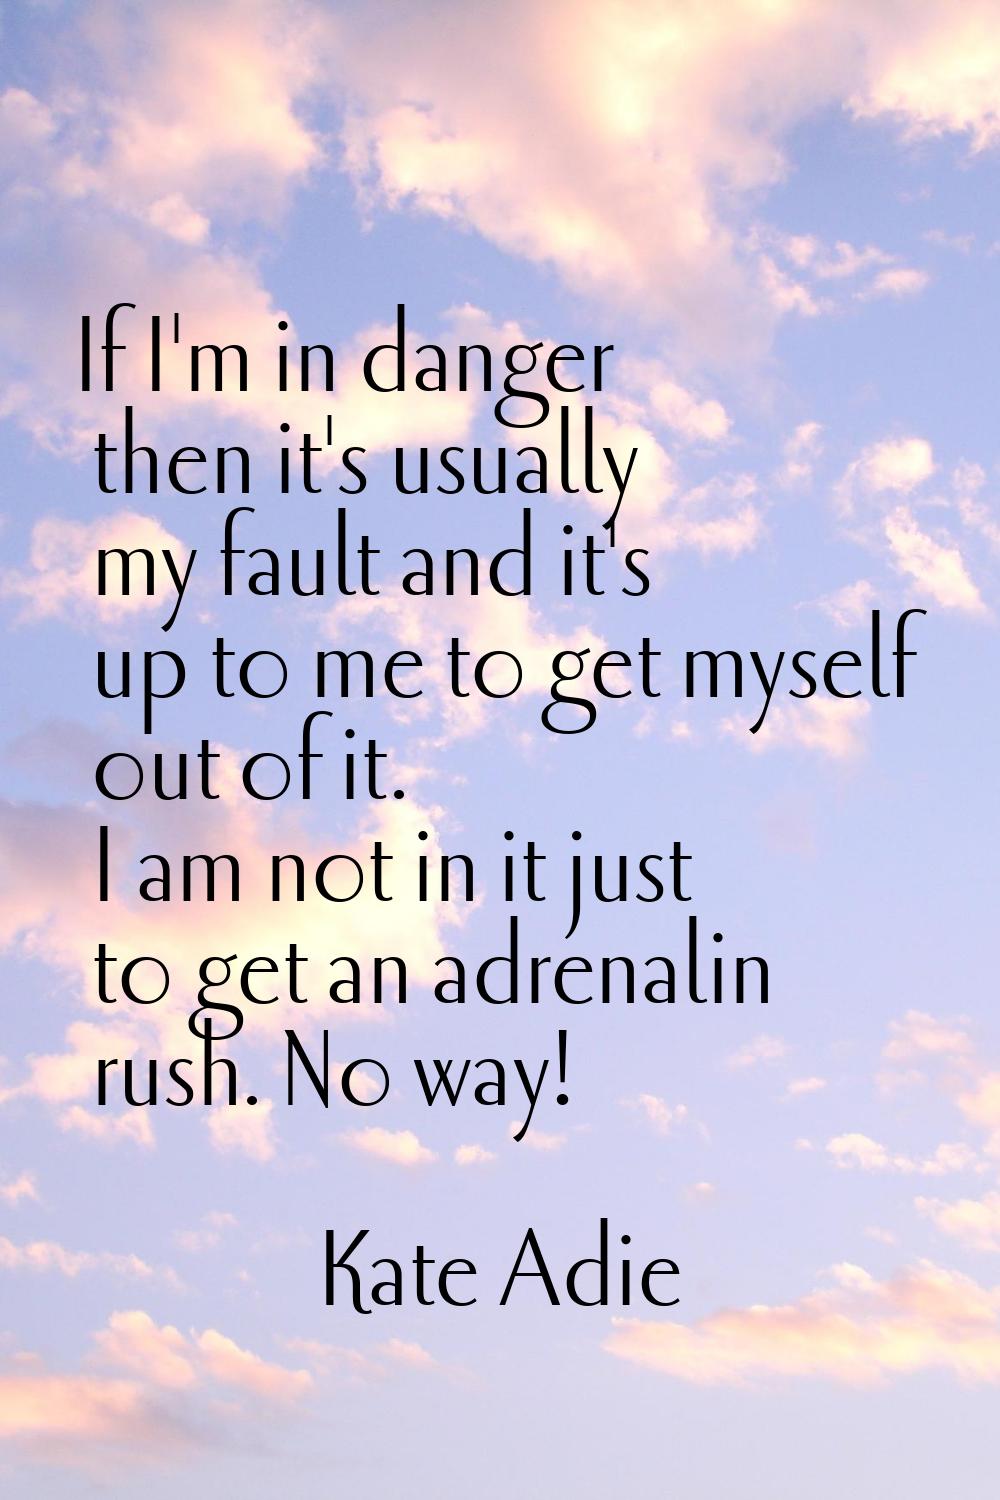 If I'm in danger then it's usually my fault and it's up to me to get myself out of it. I am not in 